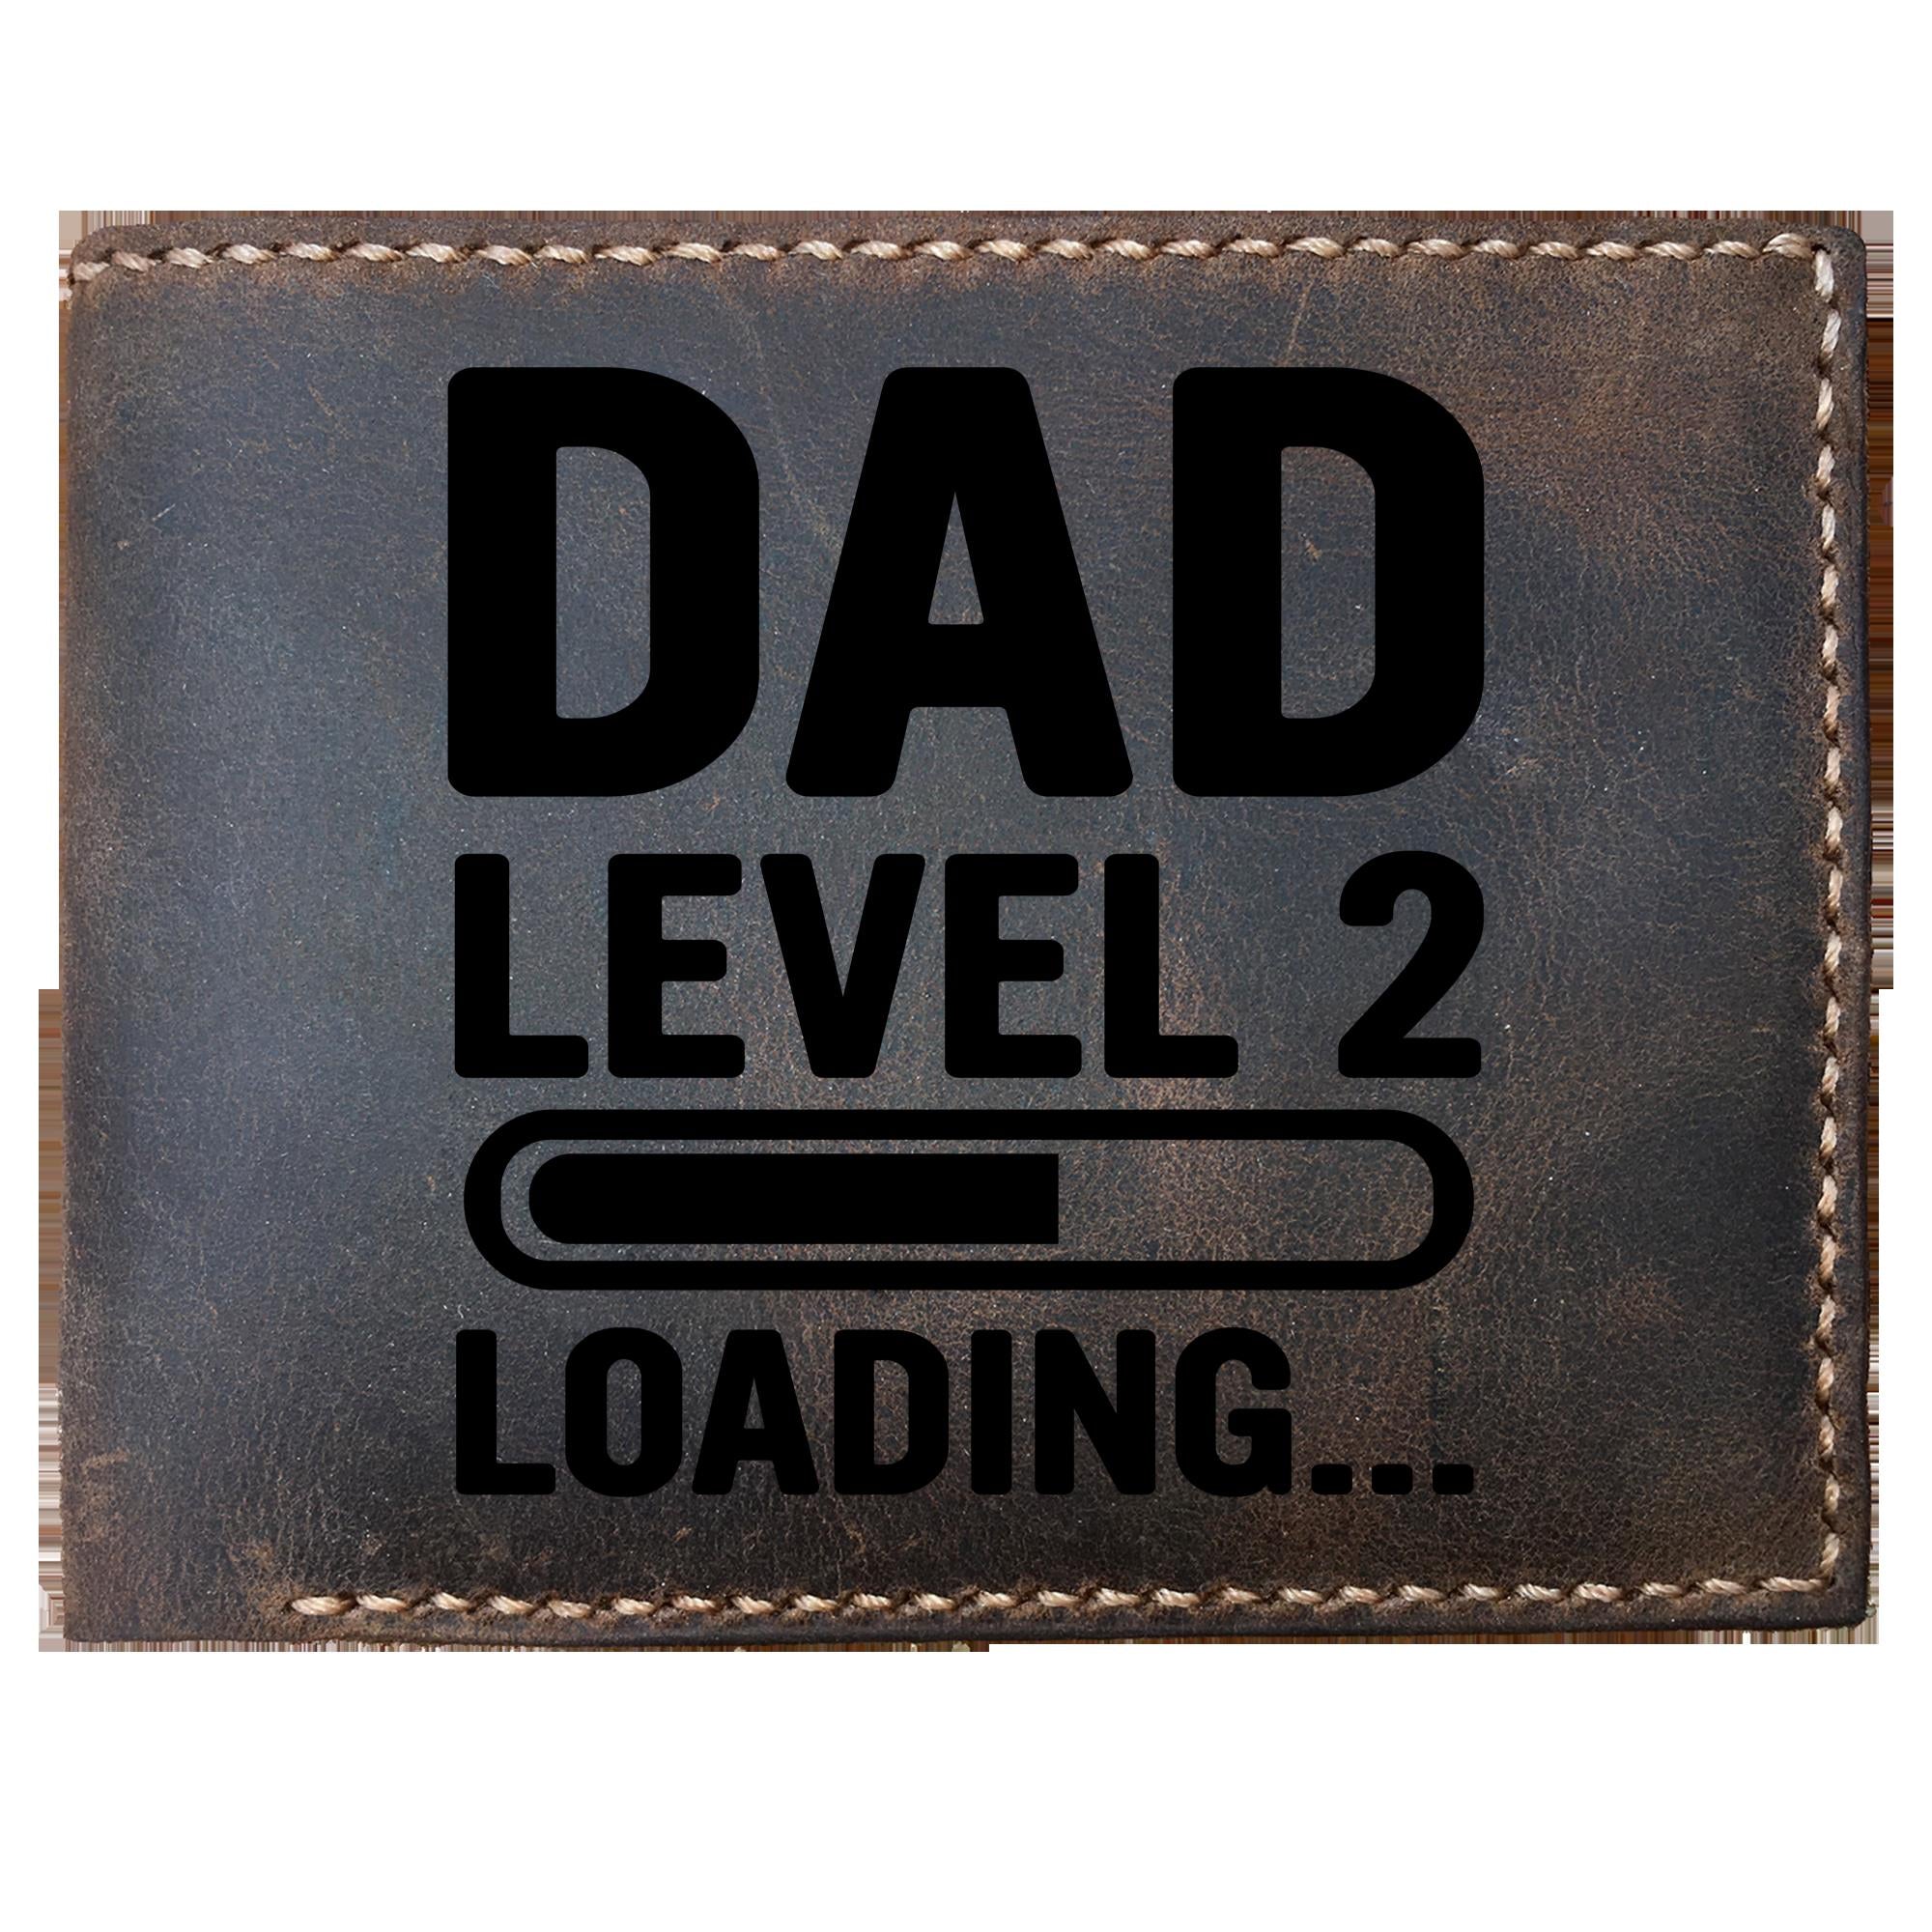 Skitongifts Funny Custom Laser Engraved Bifold Leather Wallet For Men, Dad Level 2 Loading Funny Second Time Dad Gamer Father Day